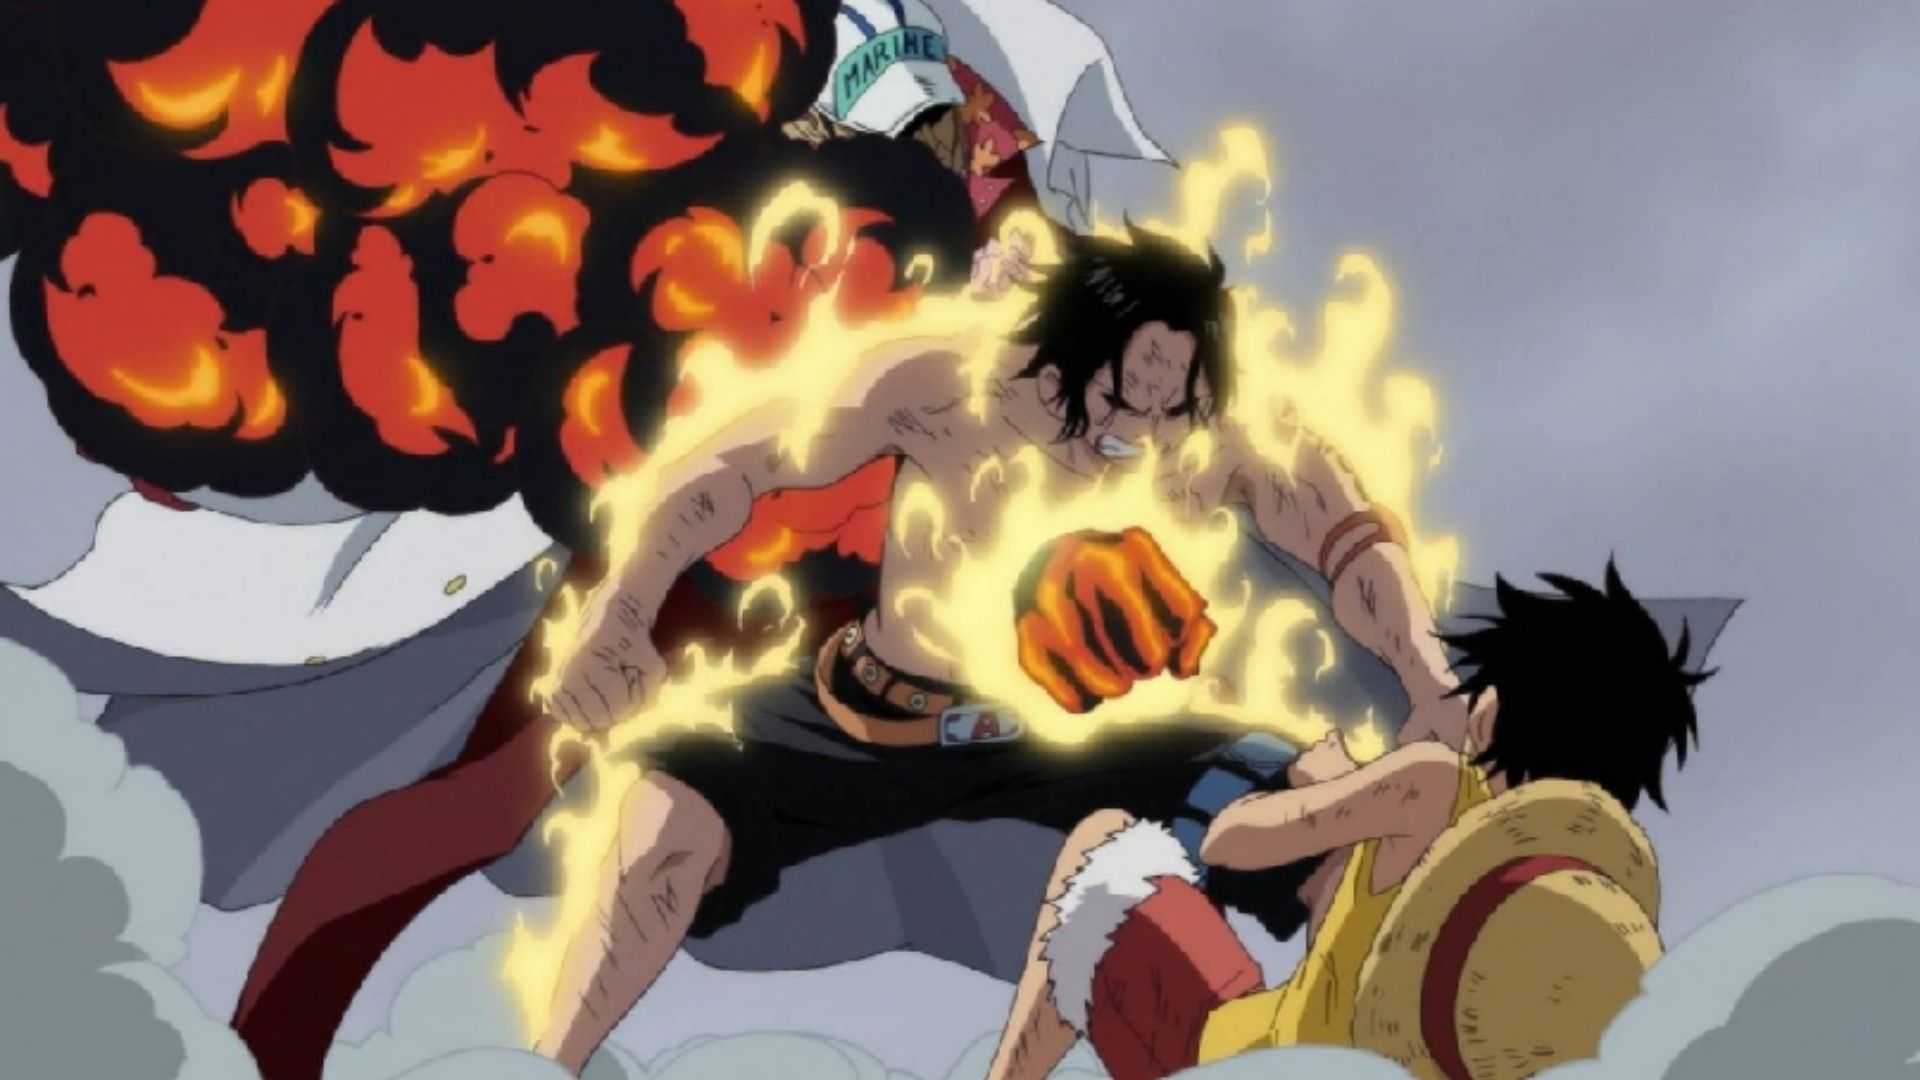 How does Ace die in One piece?